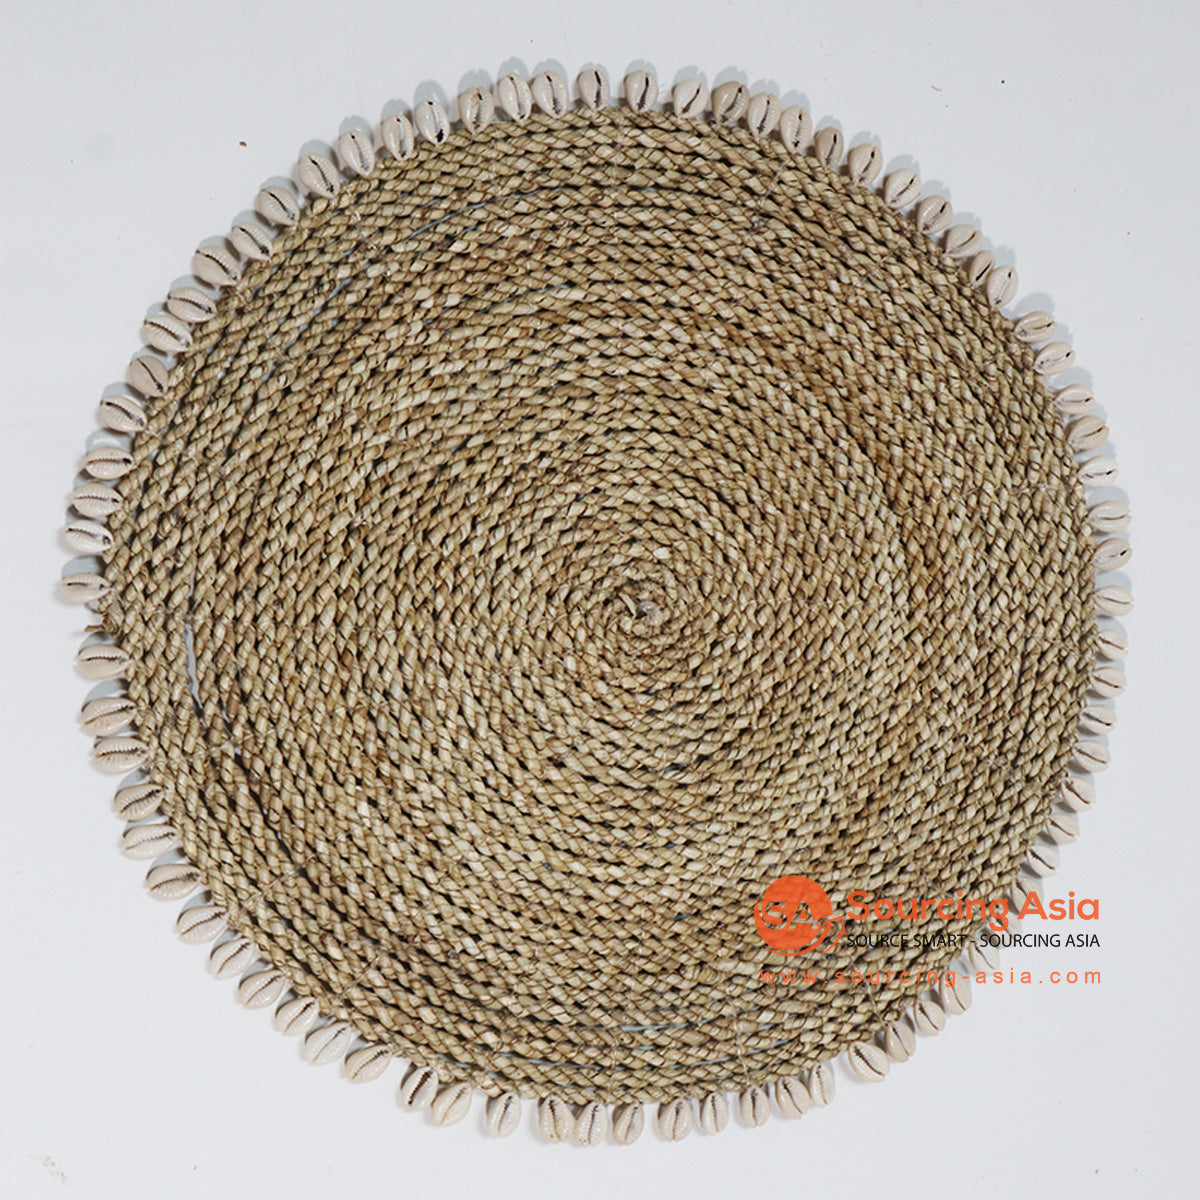 HBSC009 NATURAL SEA GRASS ROUND PLACEMAT WITH SHELL